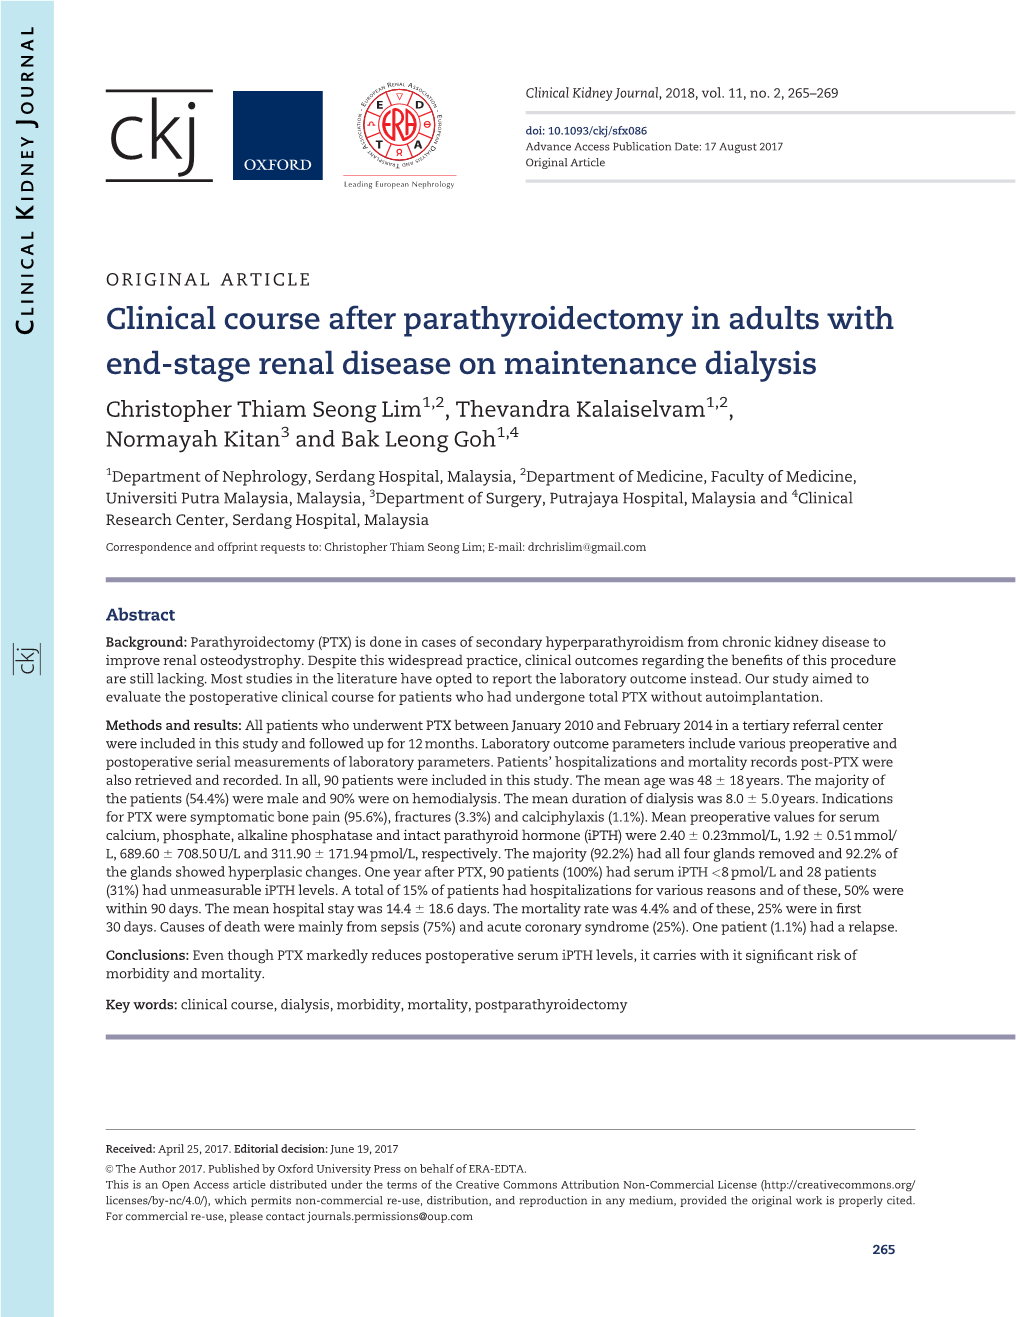 Clinical Course After Parathyroidectomy in Adults With